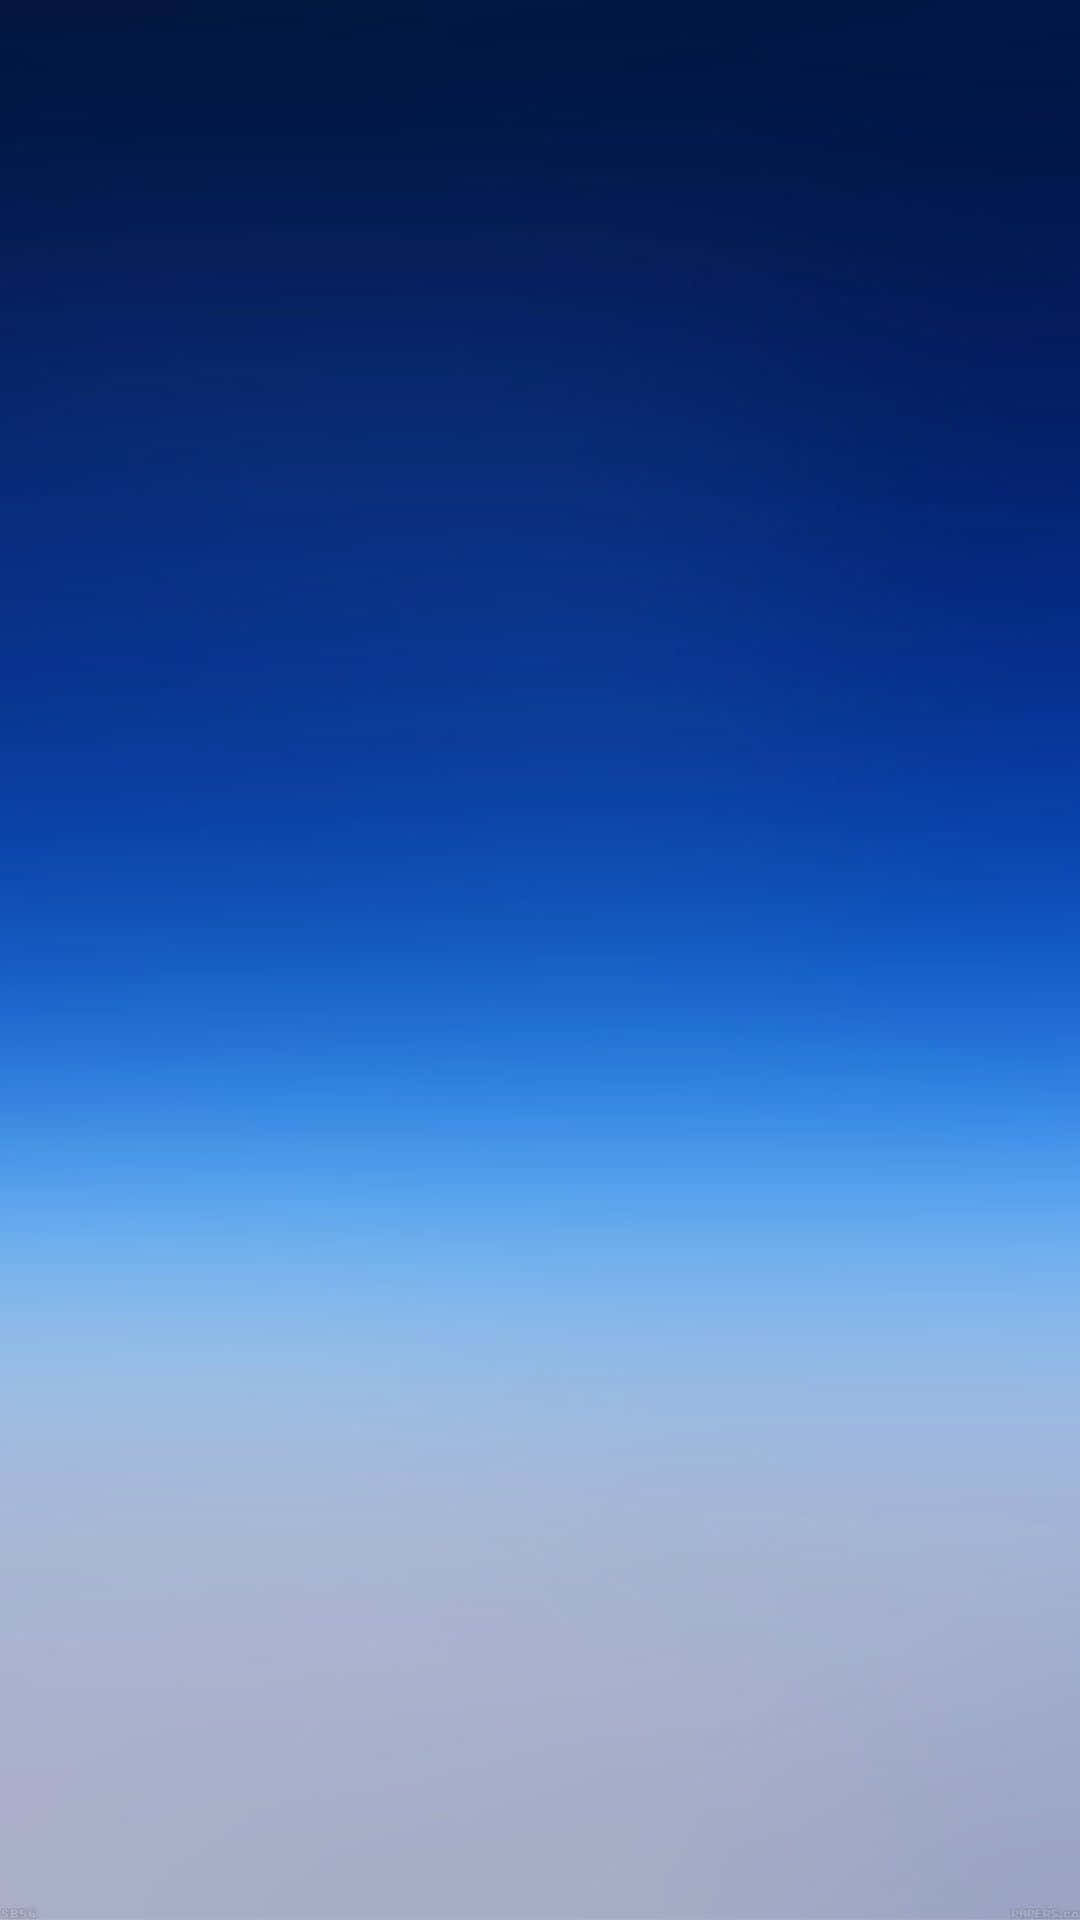 The classic but powerful blue iPhone Wallpaper